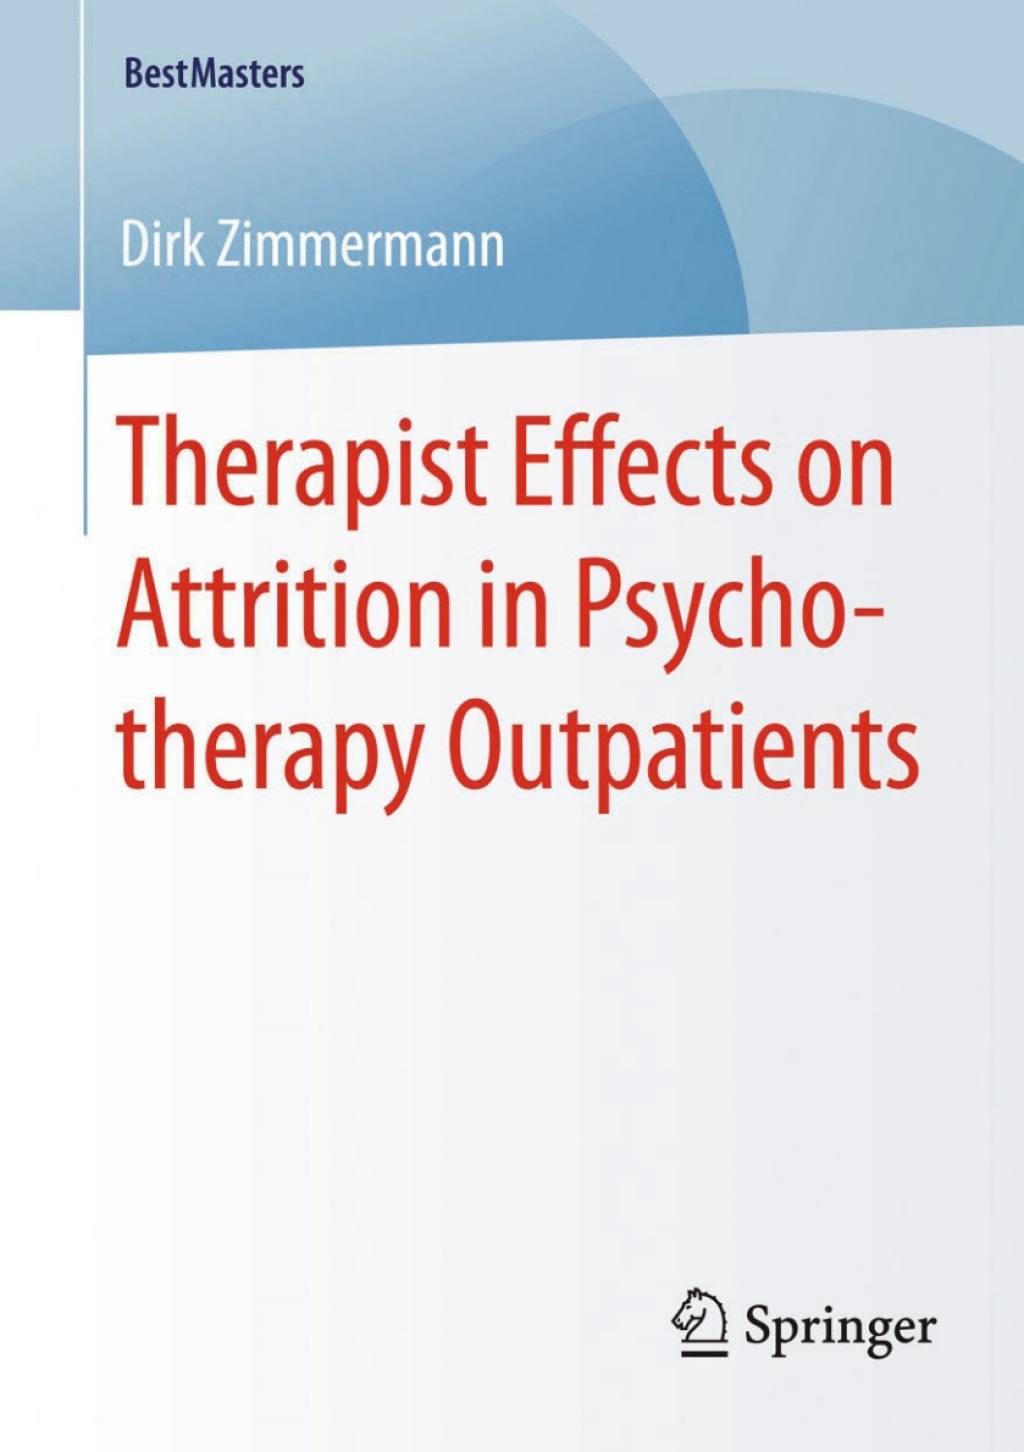 Therapist Effects on Attrition in Psychotherapy Outpatients (eBook Rental) - Dirk Zimmermann,